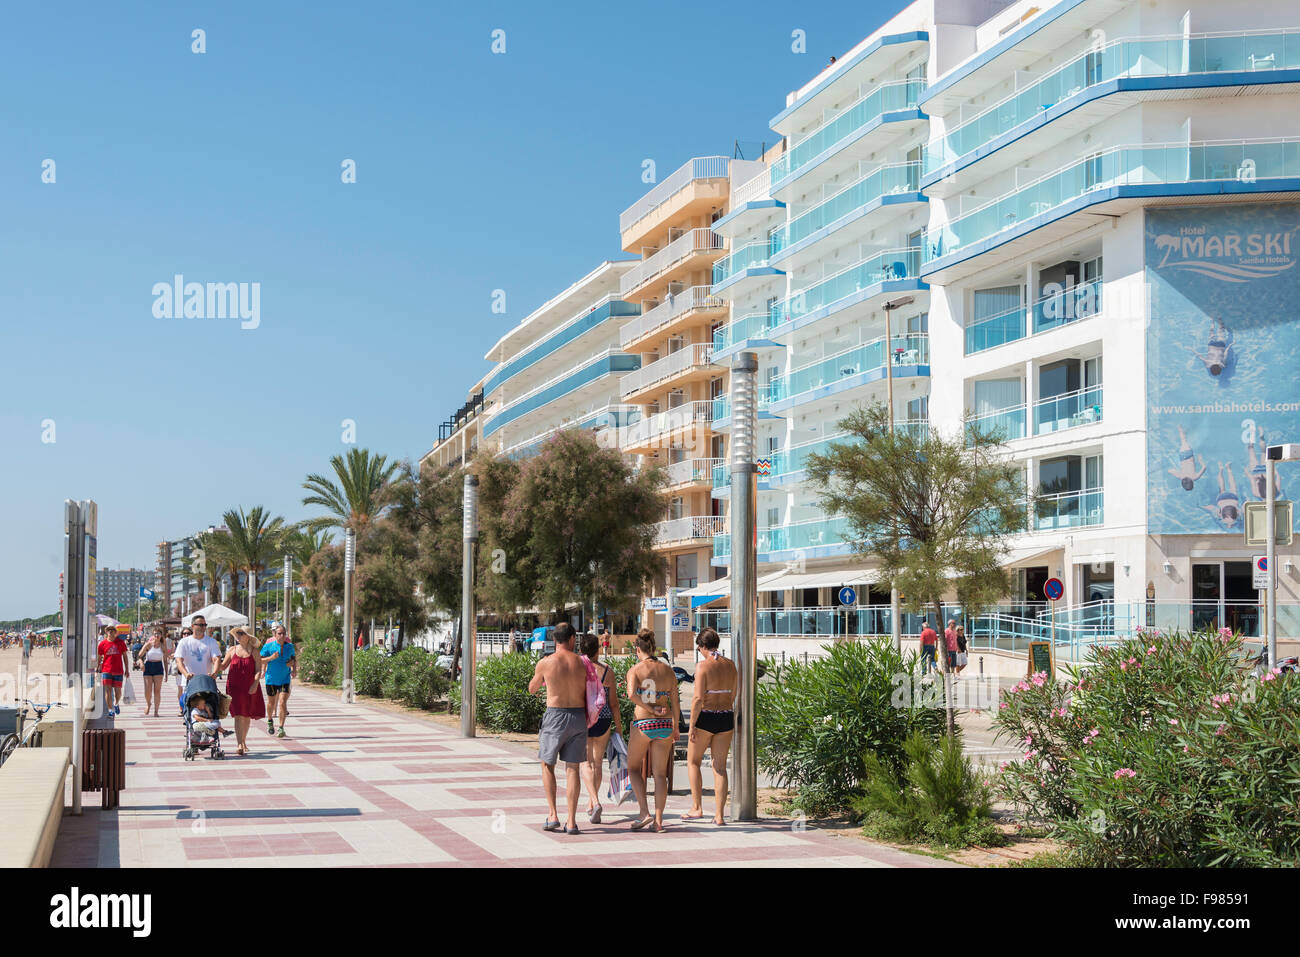 Seafront hotels, Passeig s'Abanell, Blanes, Costa Brava, Province of Girona, Catalonia, Spain Stock Photo